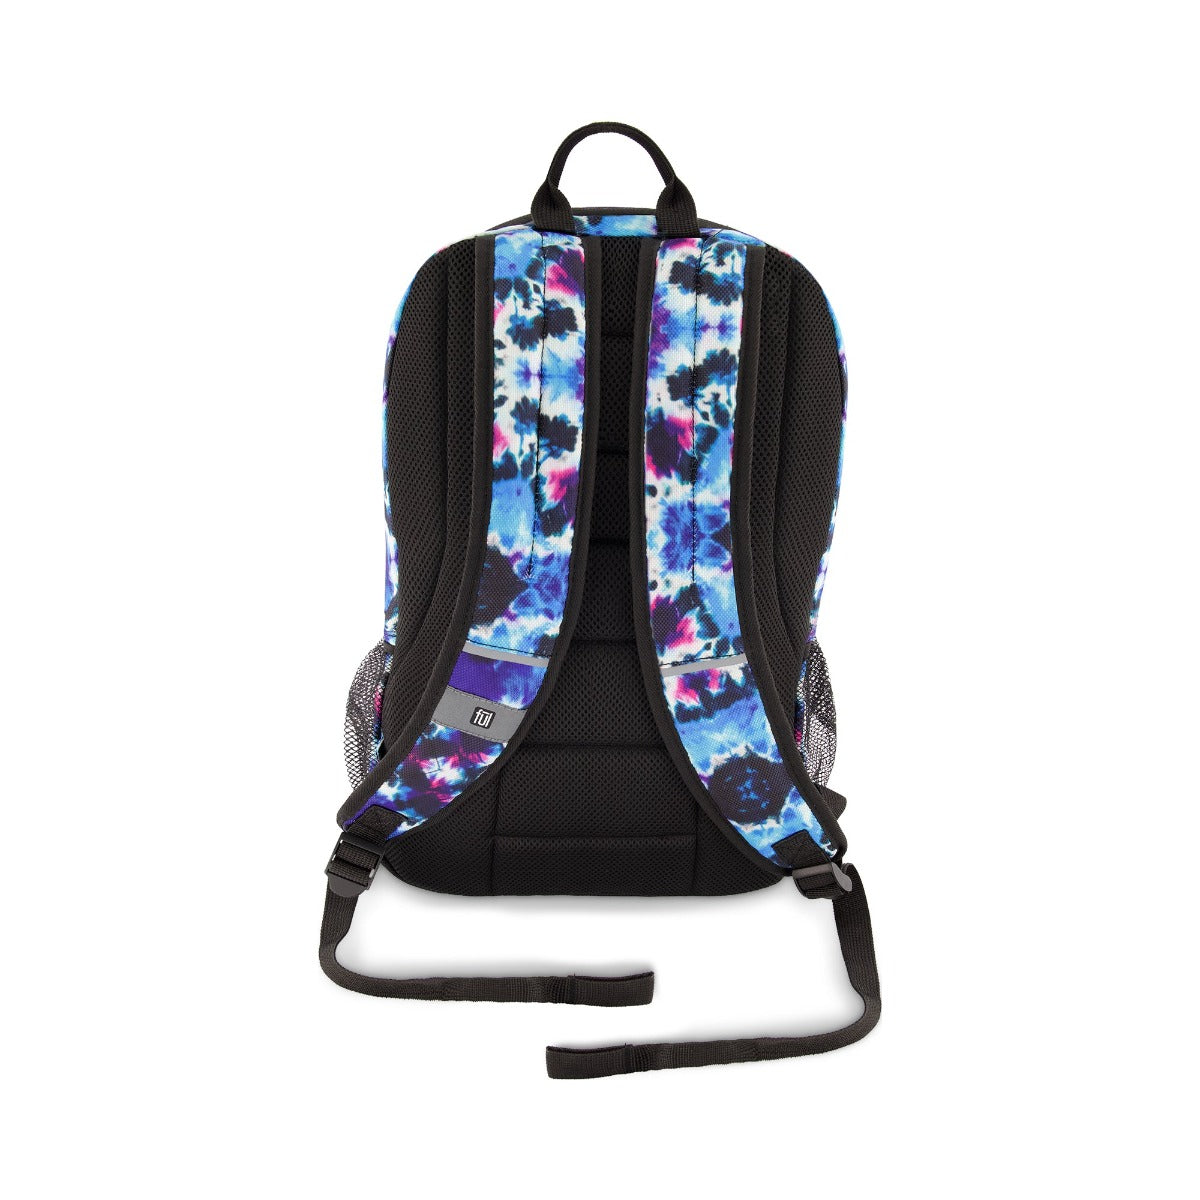 Terrace Laptop Backpack FUL Blue White Backpack On Sale $29.99